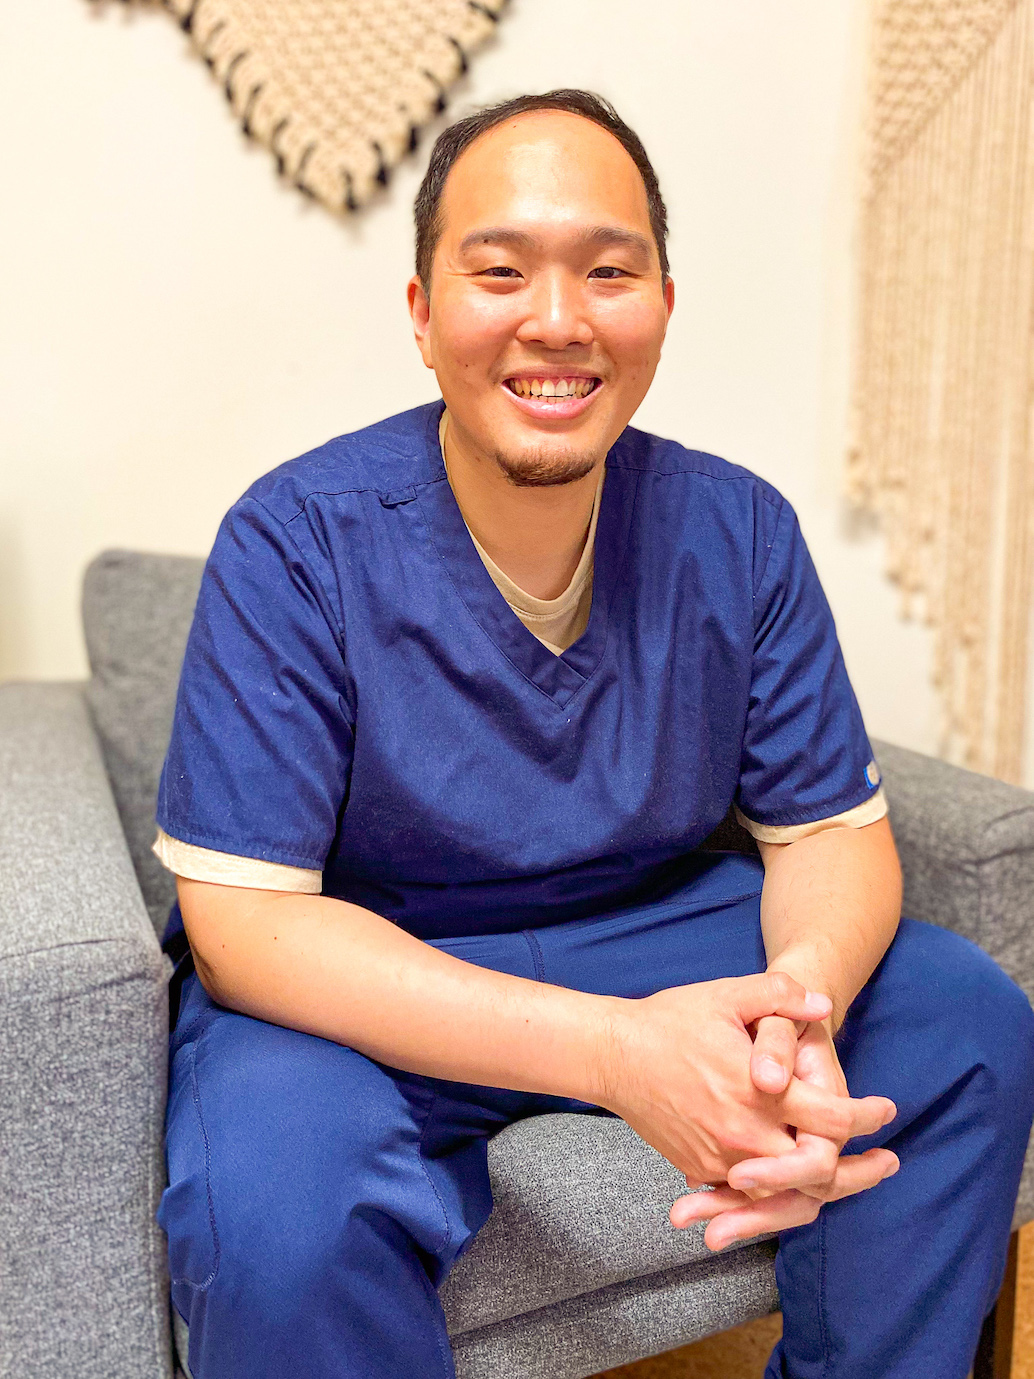 Doctor of acupuncture and traditional Chinese medicine looking at the camera sitting in grey chair and wearing blue scrubs.